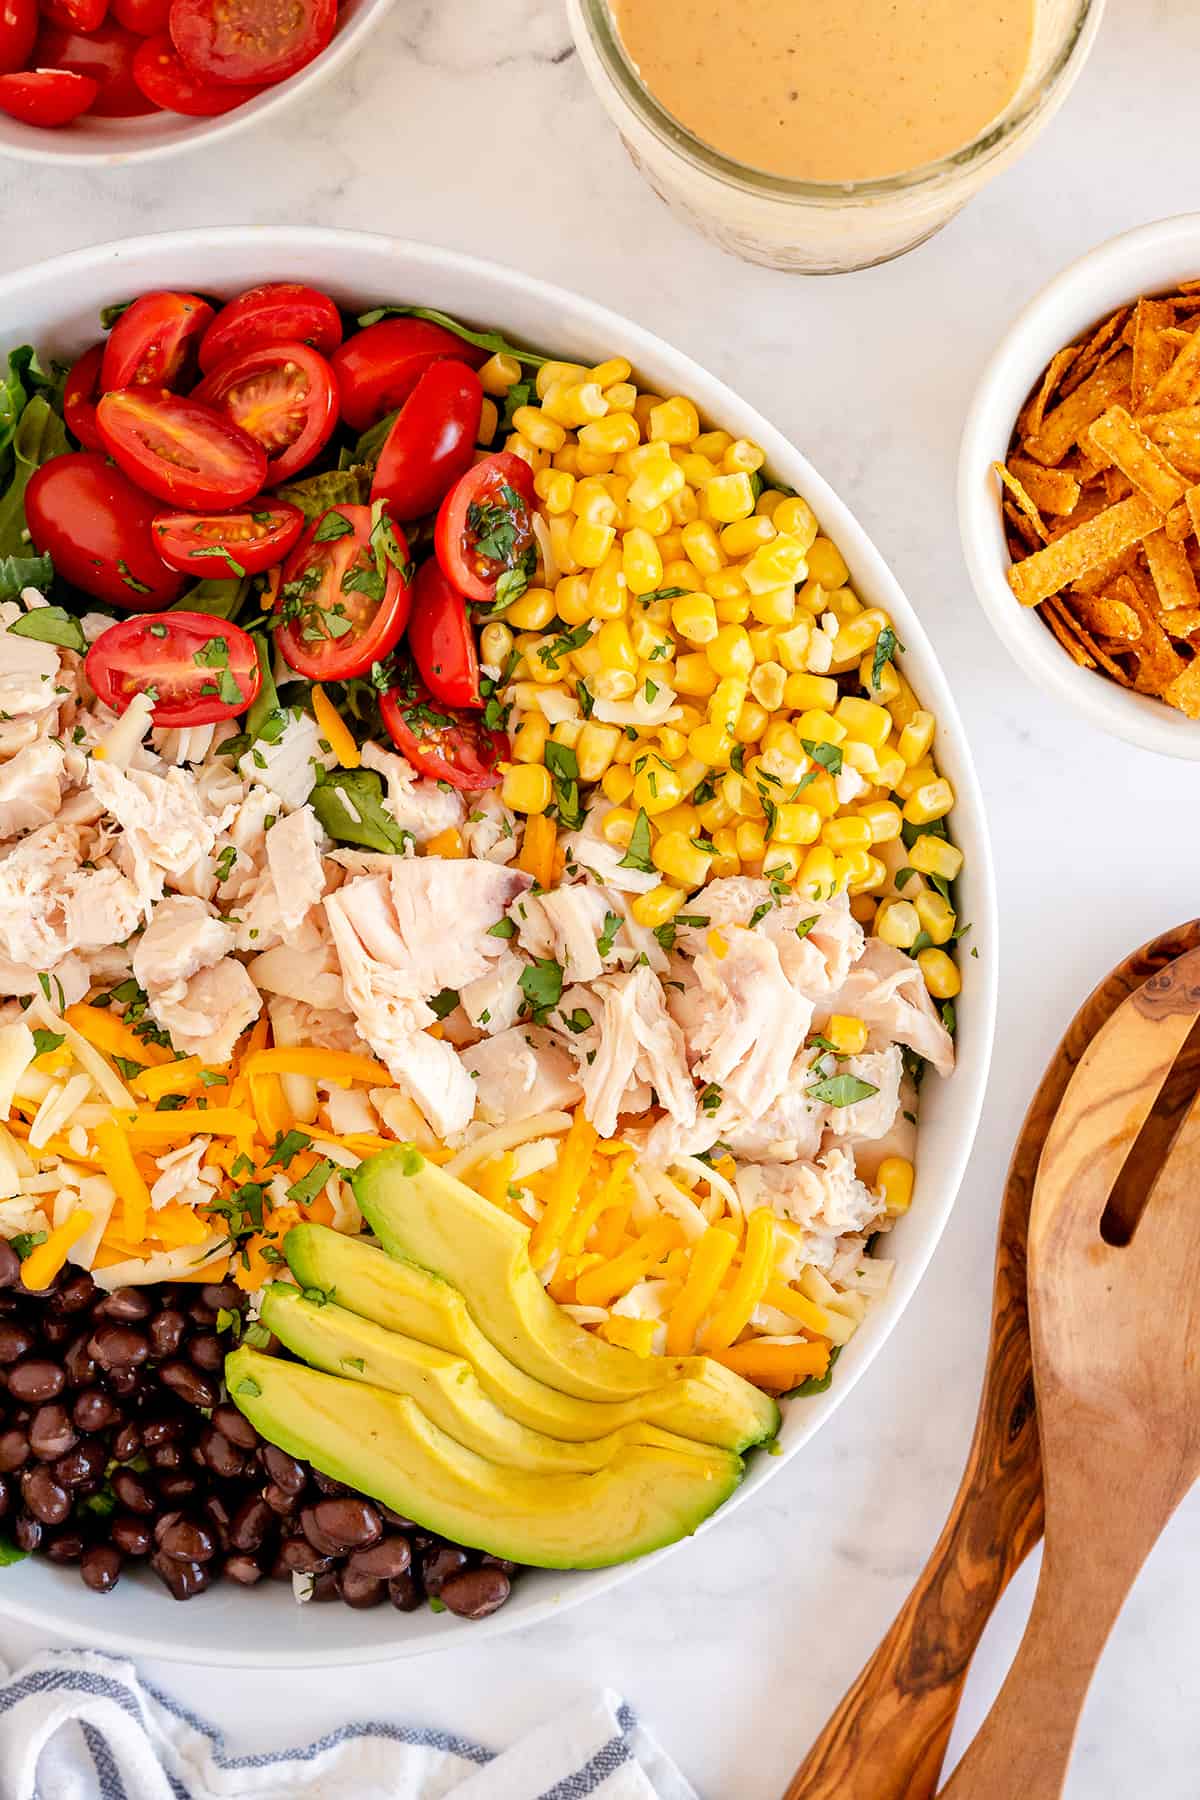 Corn, beans, avocado, tomato, chicken, and cheese in a salad bowl.